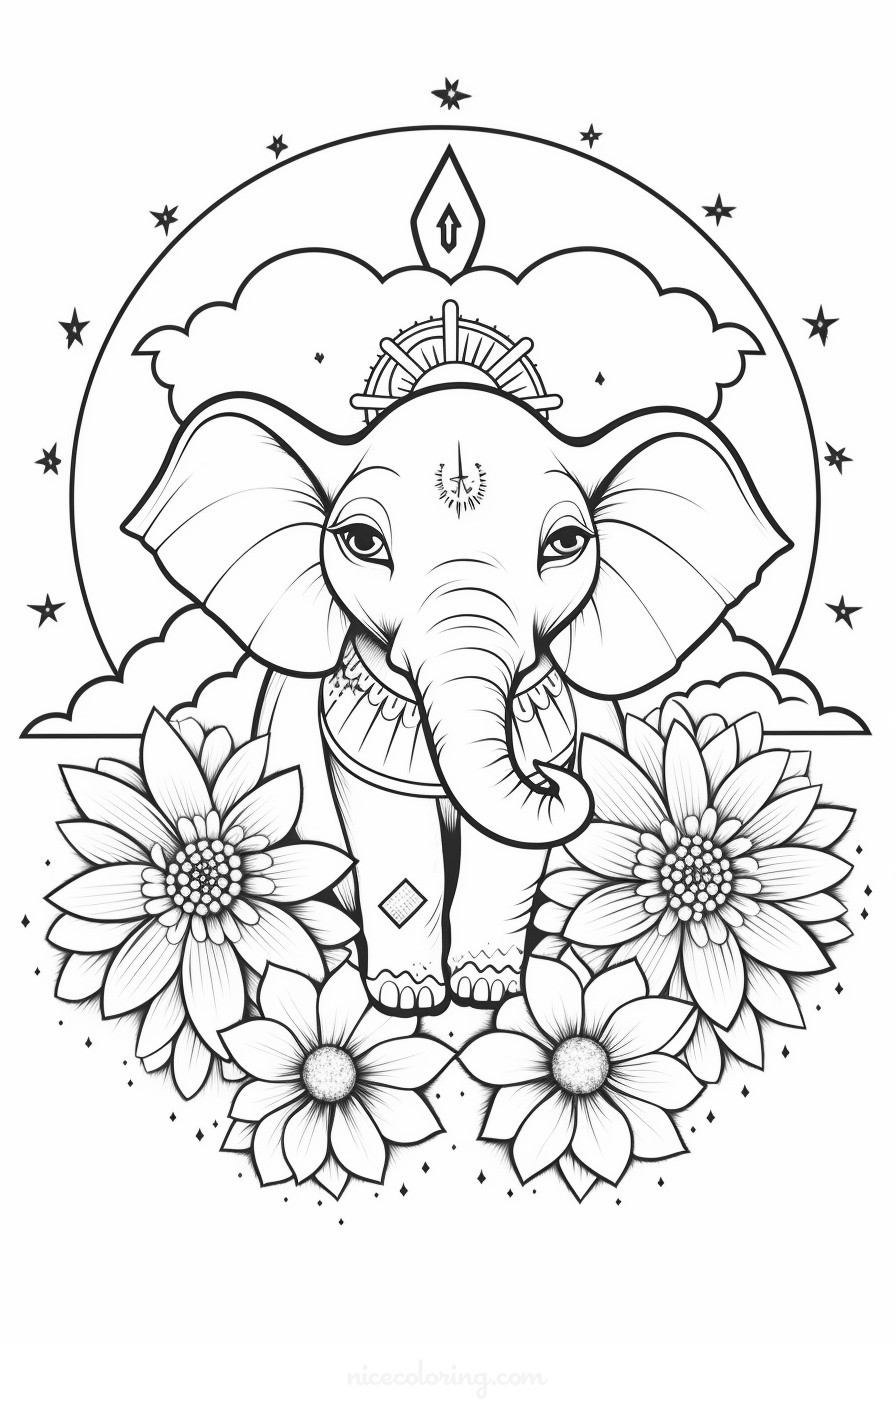 Elephants by the river coloring page